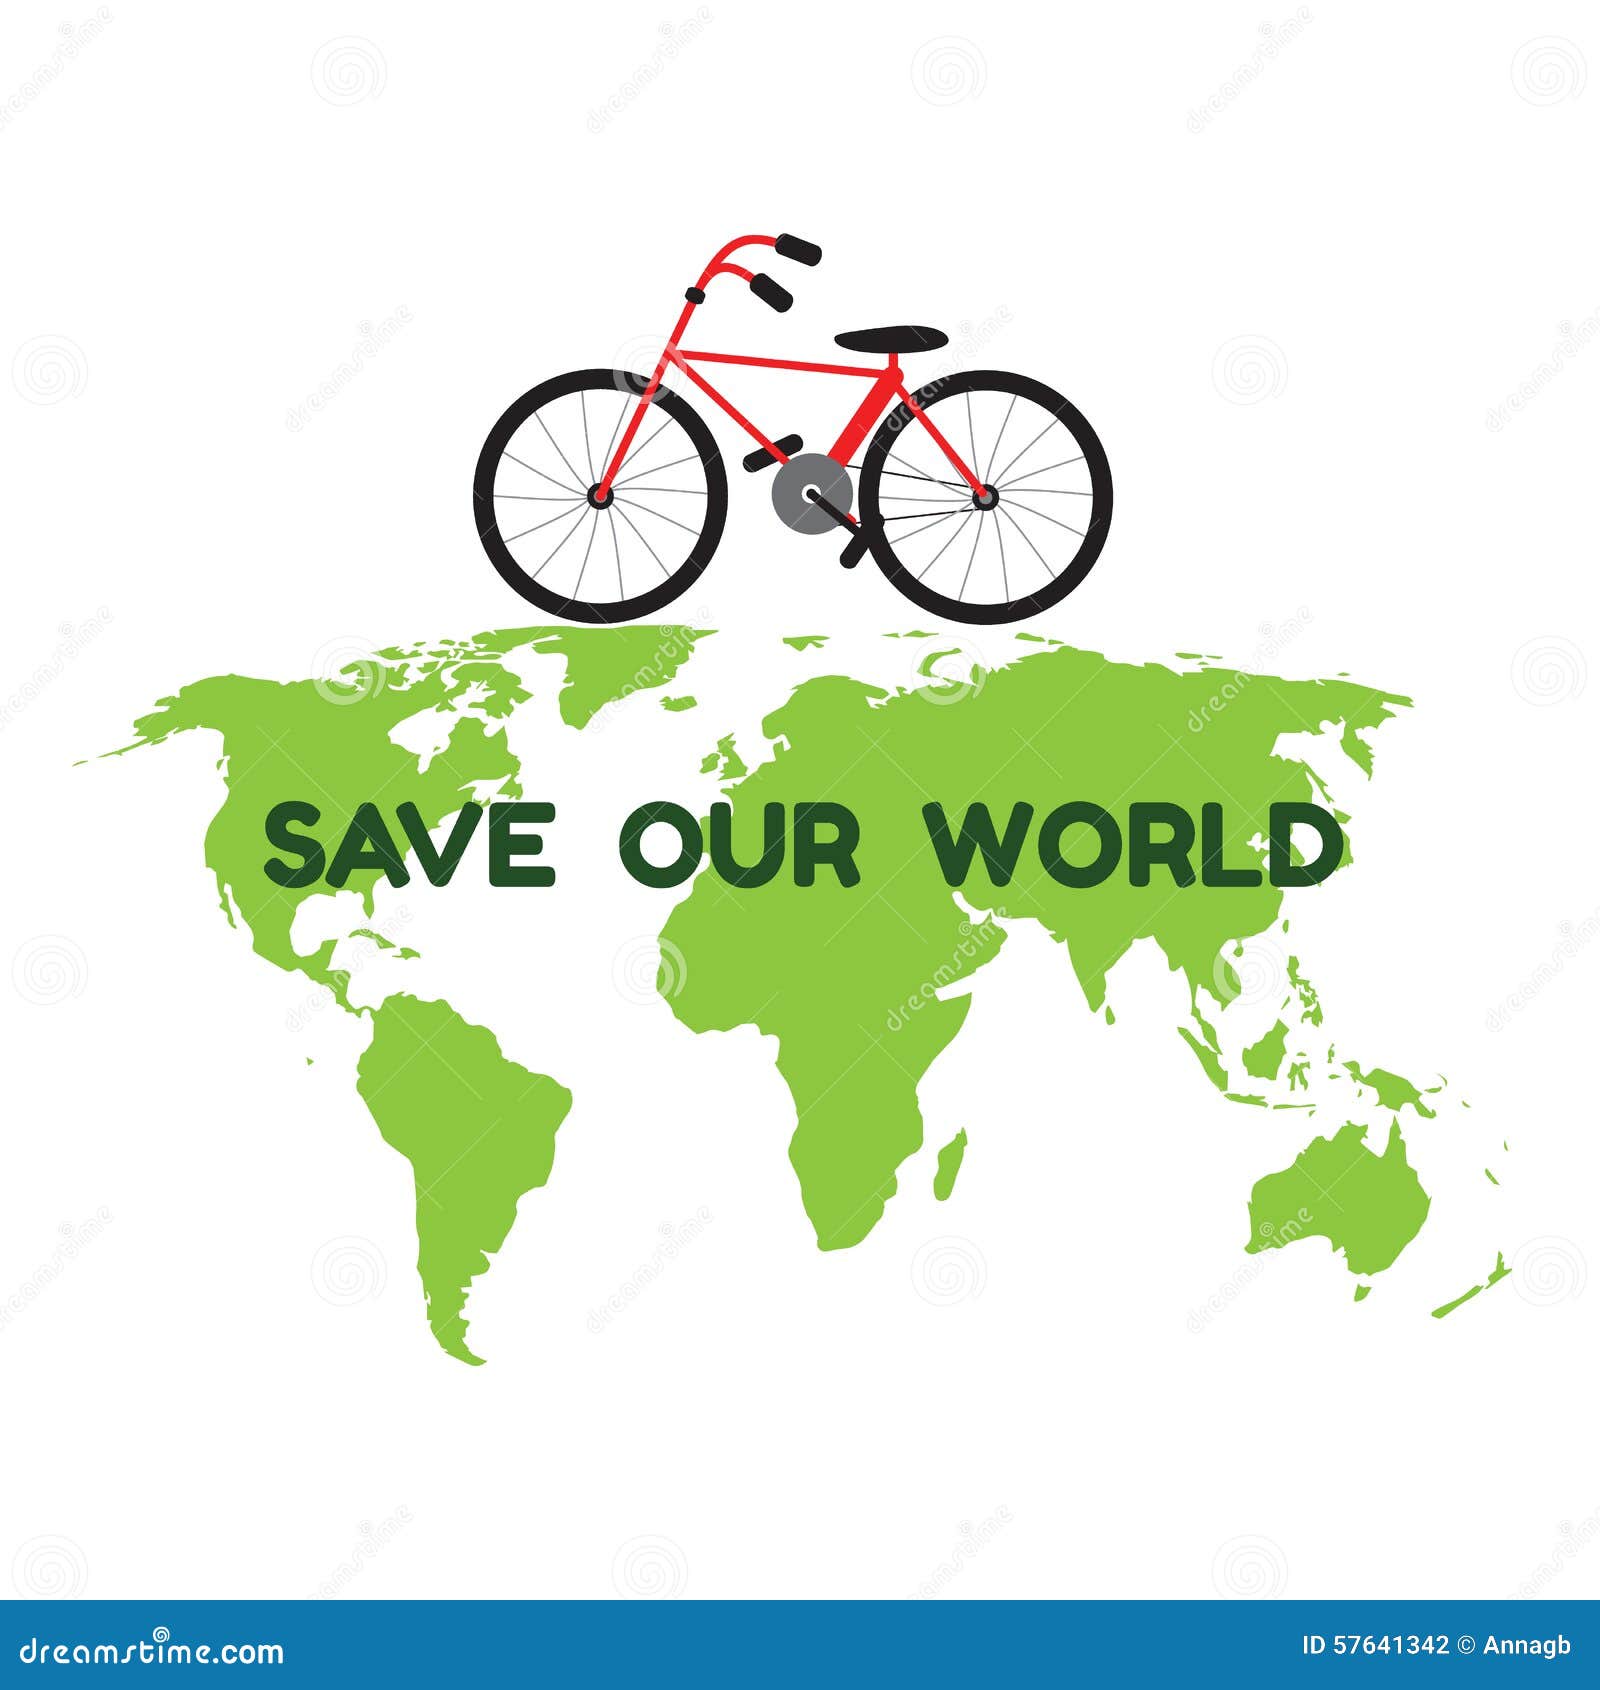 bycicle on green world map and word save our world for environme